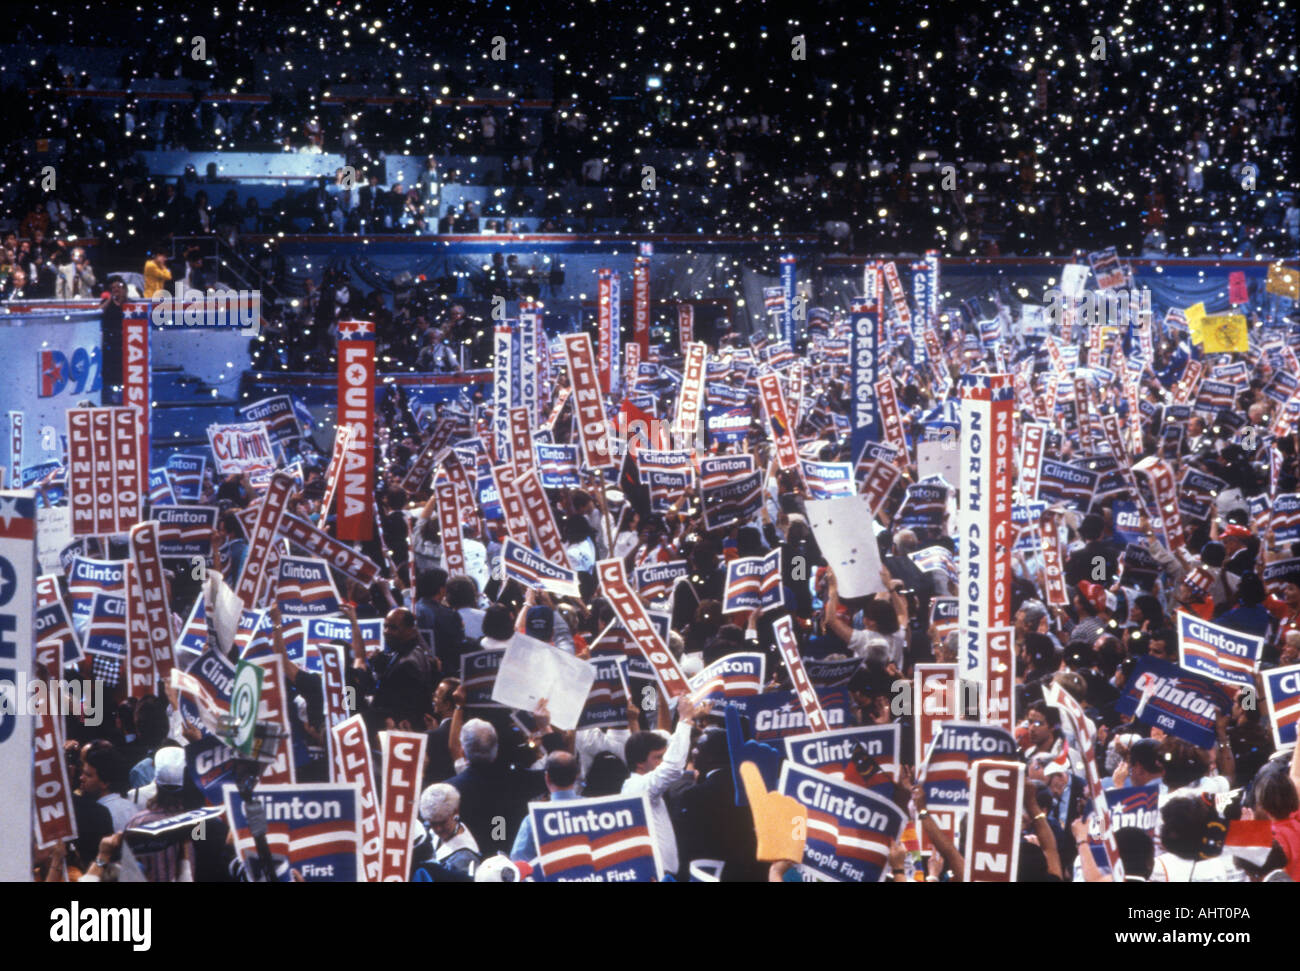 Delegates cheer for Clinton s nomination at the 1992 Democratic National Convention at Madison Square Garden New York Stock Photo